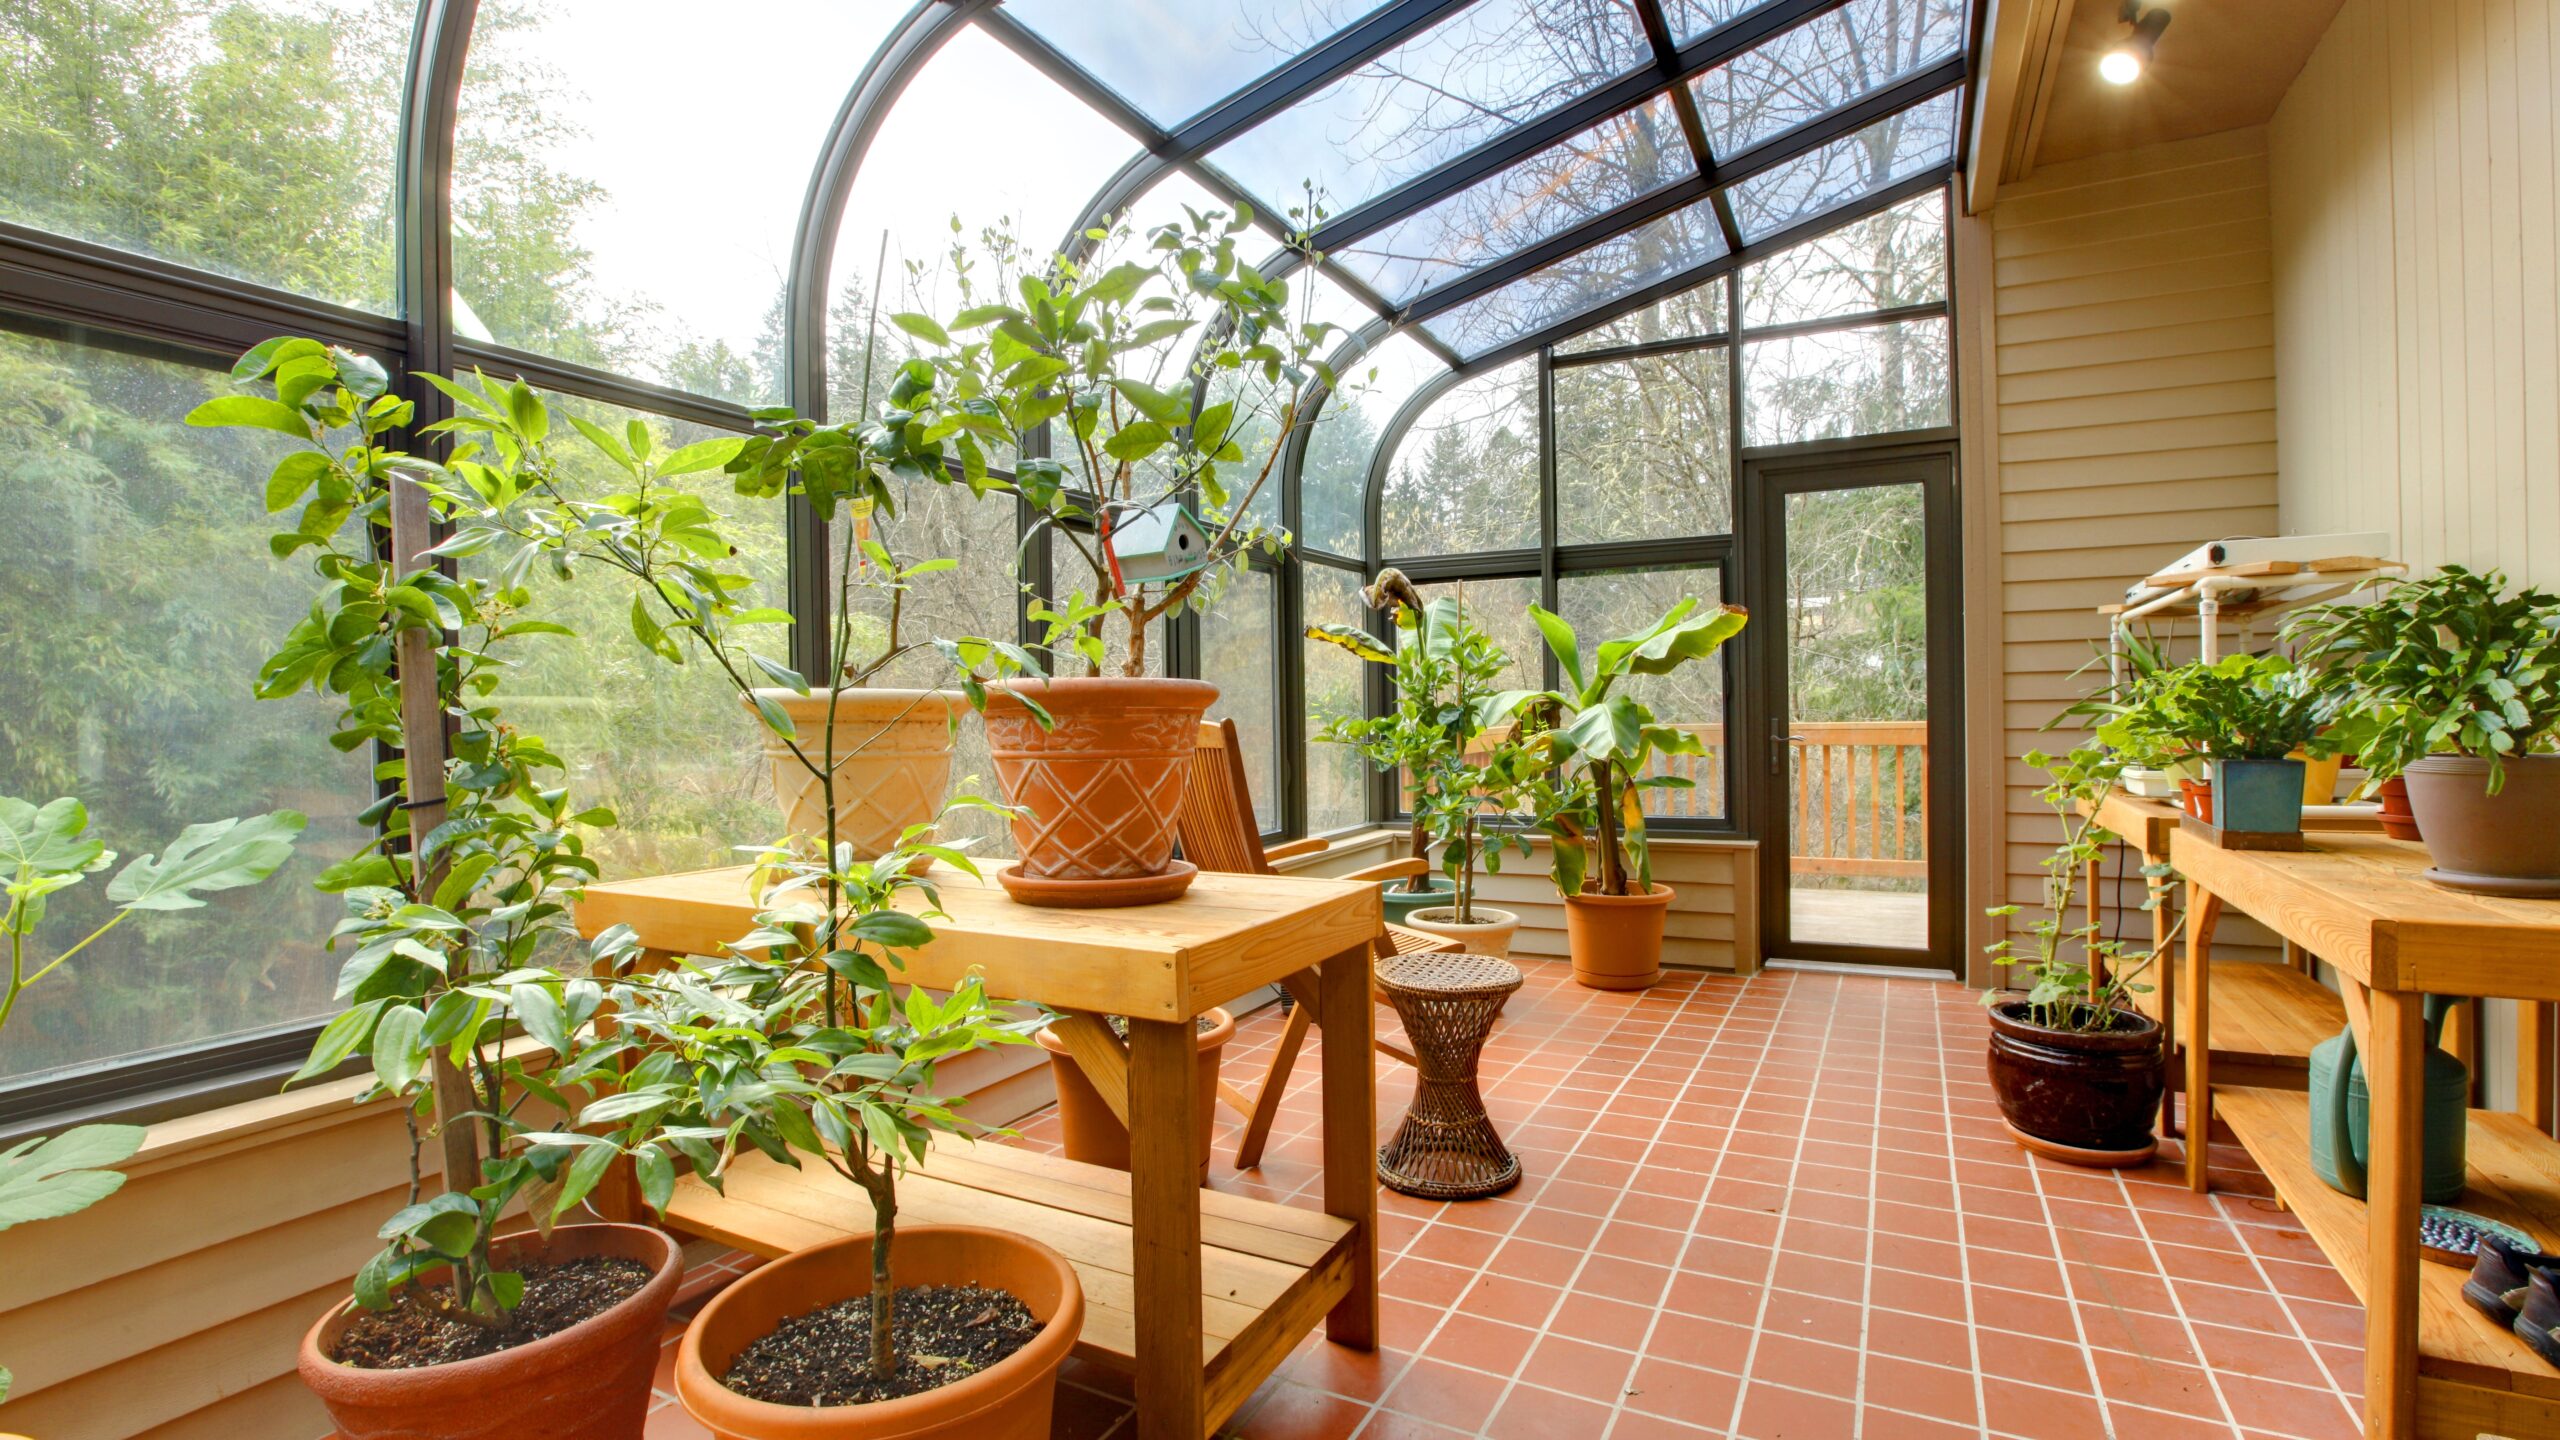 A sunroom with glass walls and ceiling, orange floor tiles, and several plants